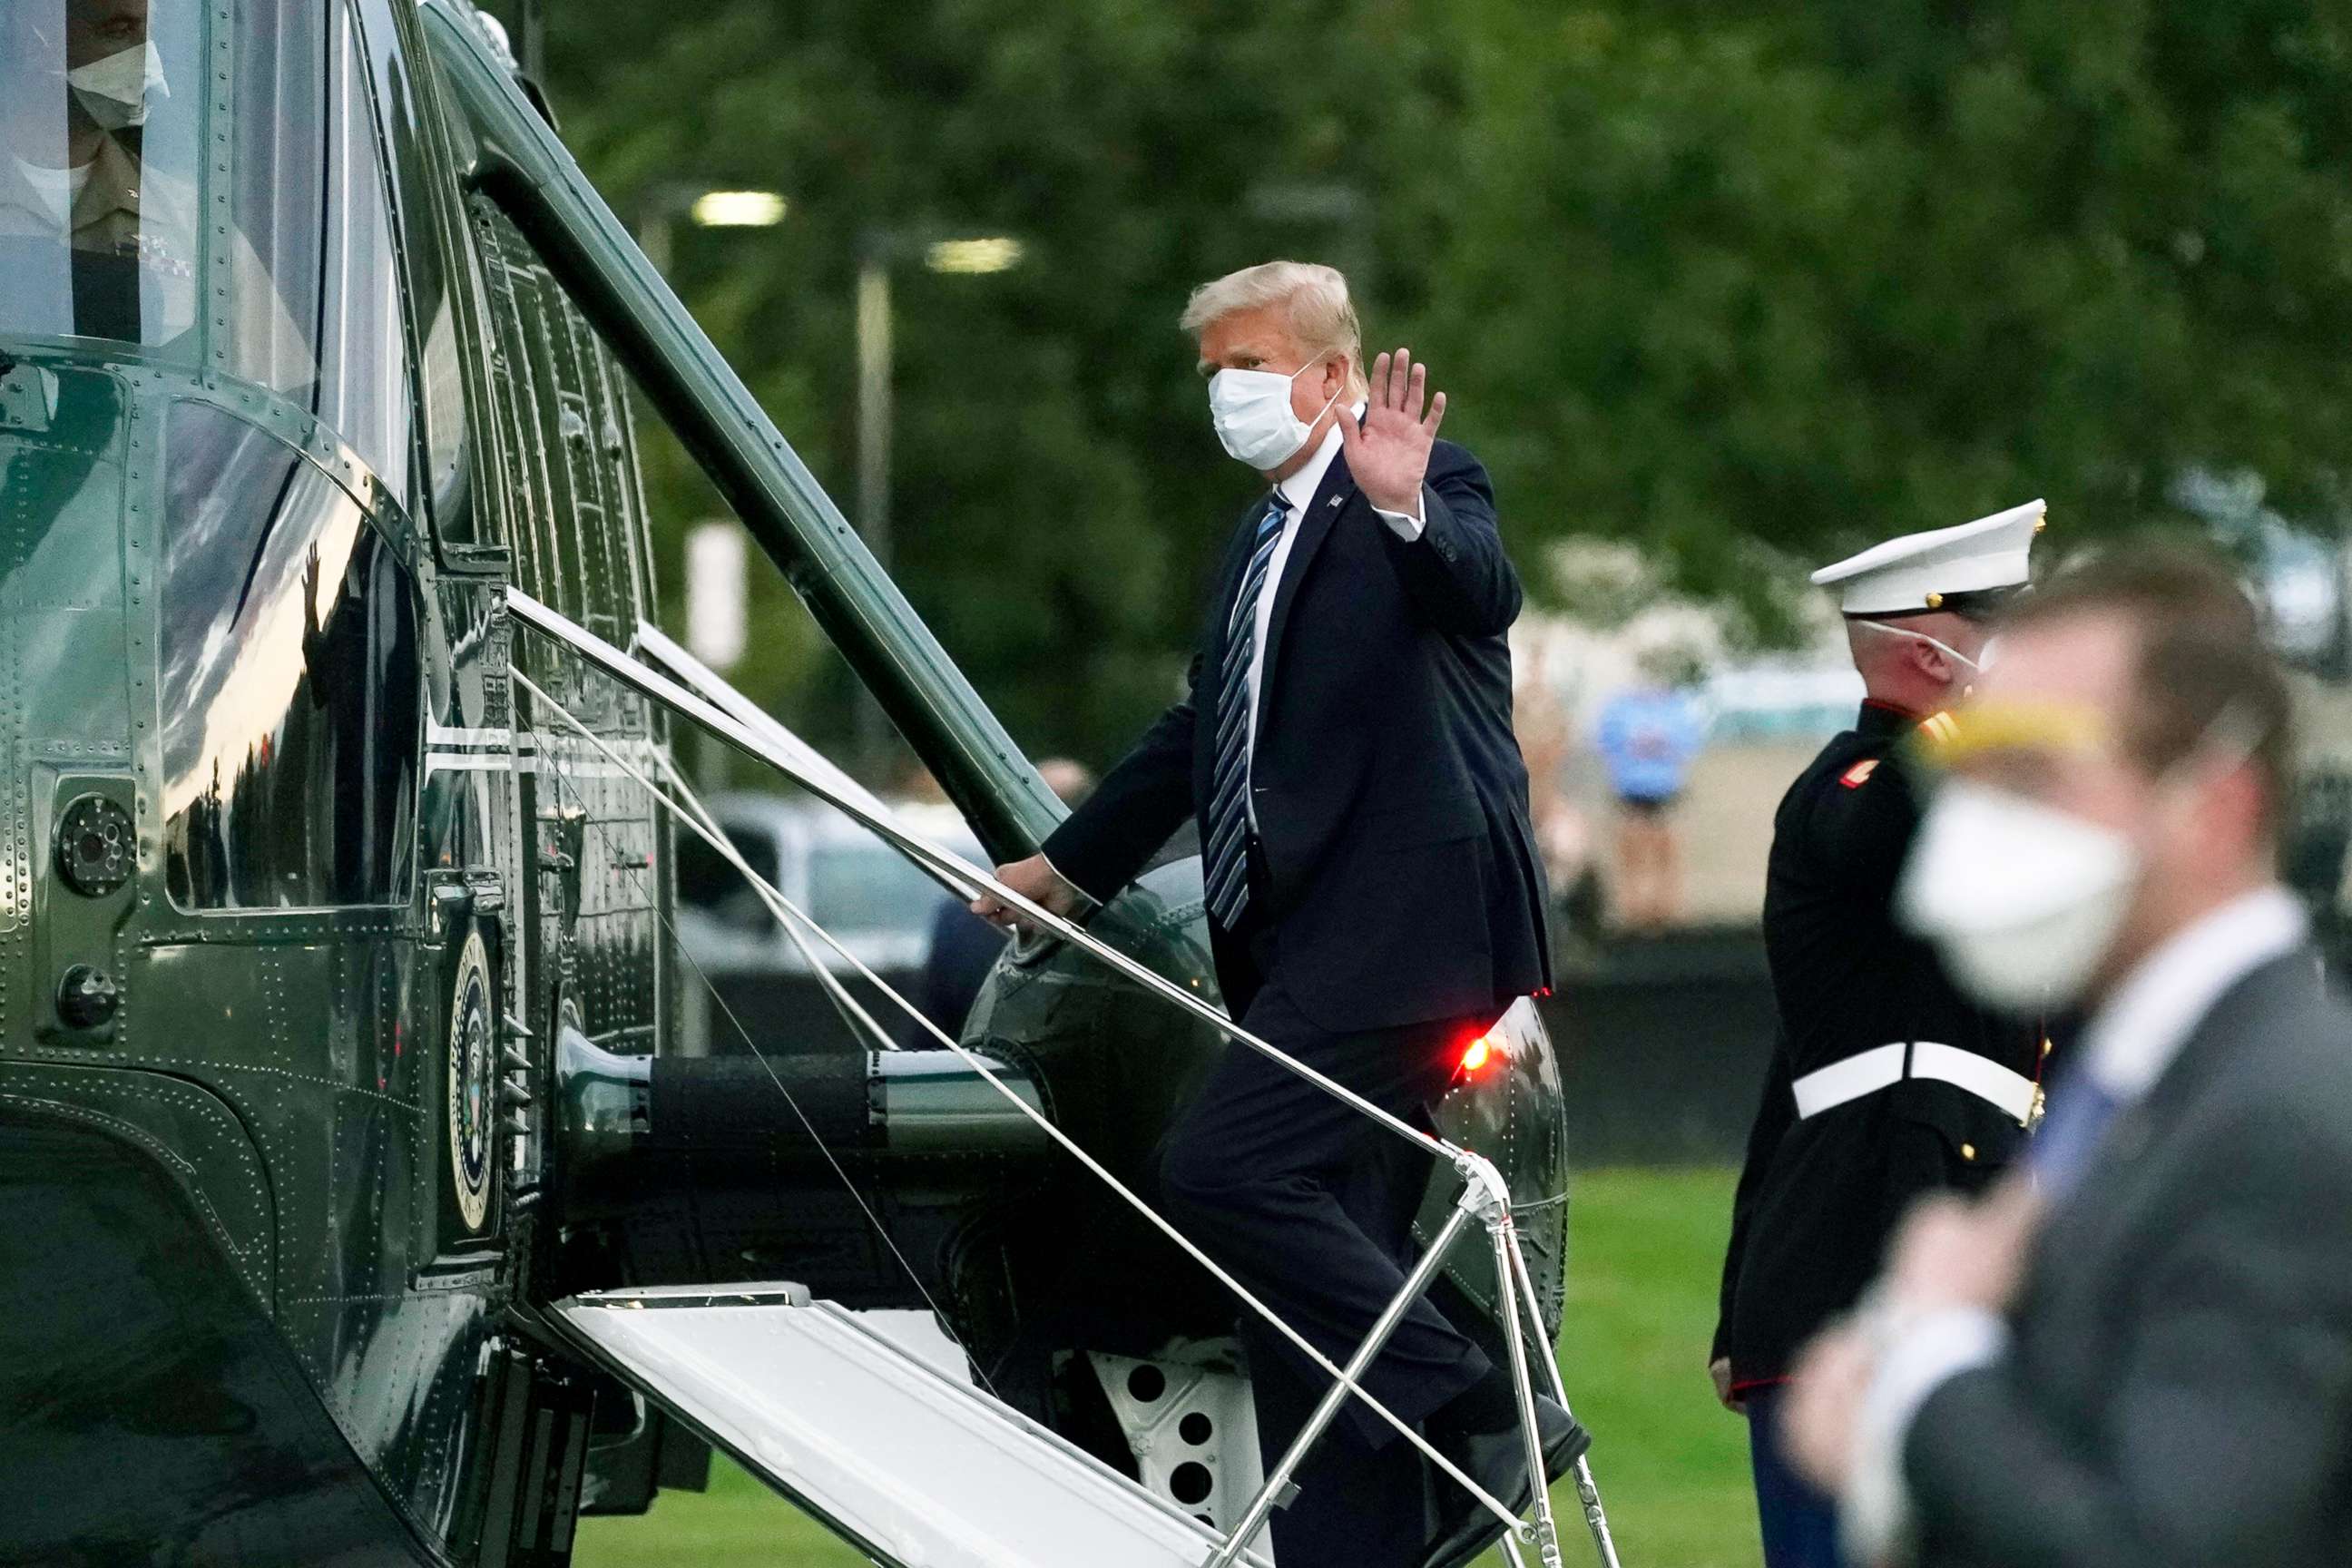 PHOTO: President Donald Trump boards Marine One to return to the White House after receiving treatments for COVID-19 at Walter Reed National Military Medical Center, Oct. 5, 2020, in Bethesda, Md. 